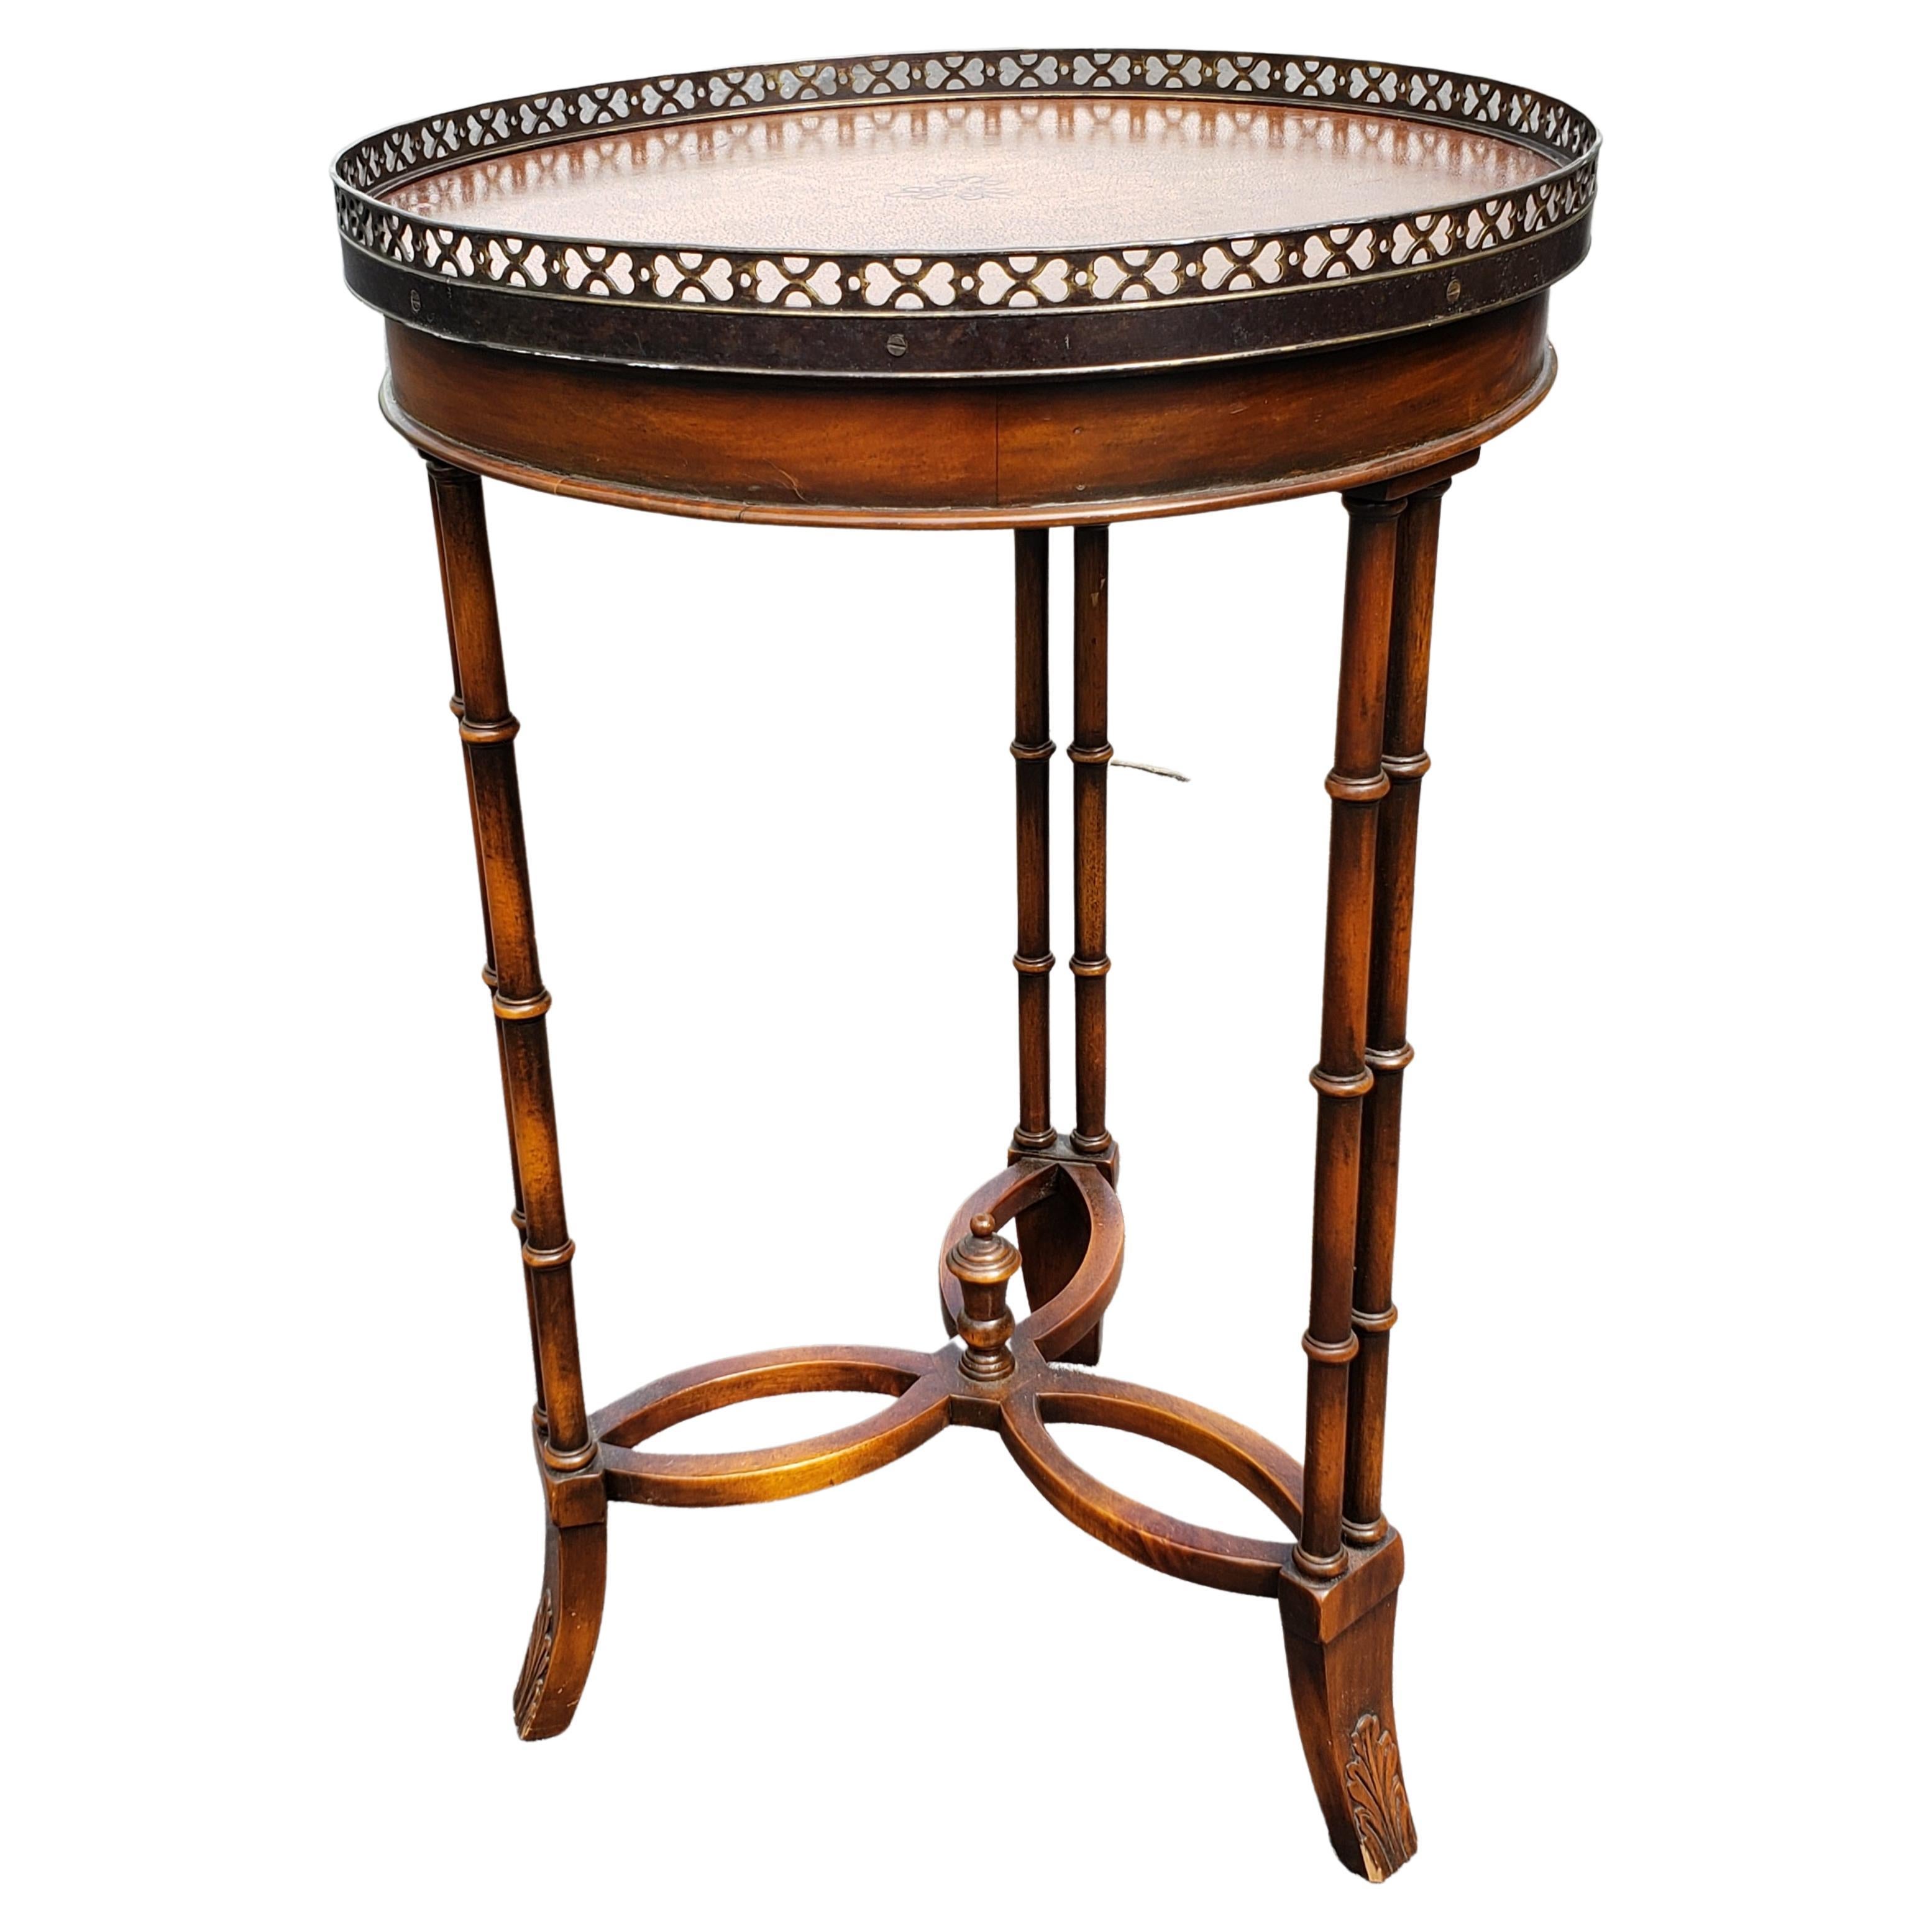 Mahogany Faux Bamboo Galleried Leather Top Gueridon Side Table